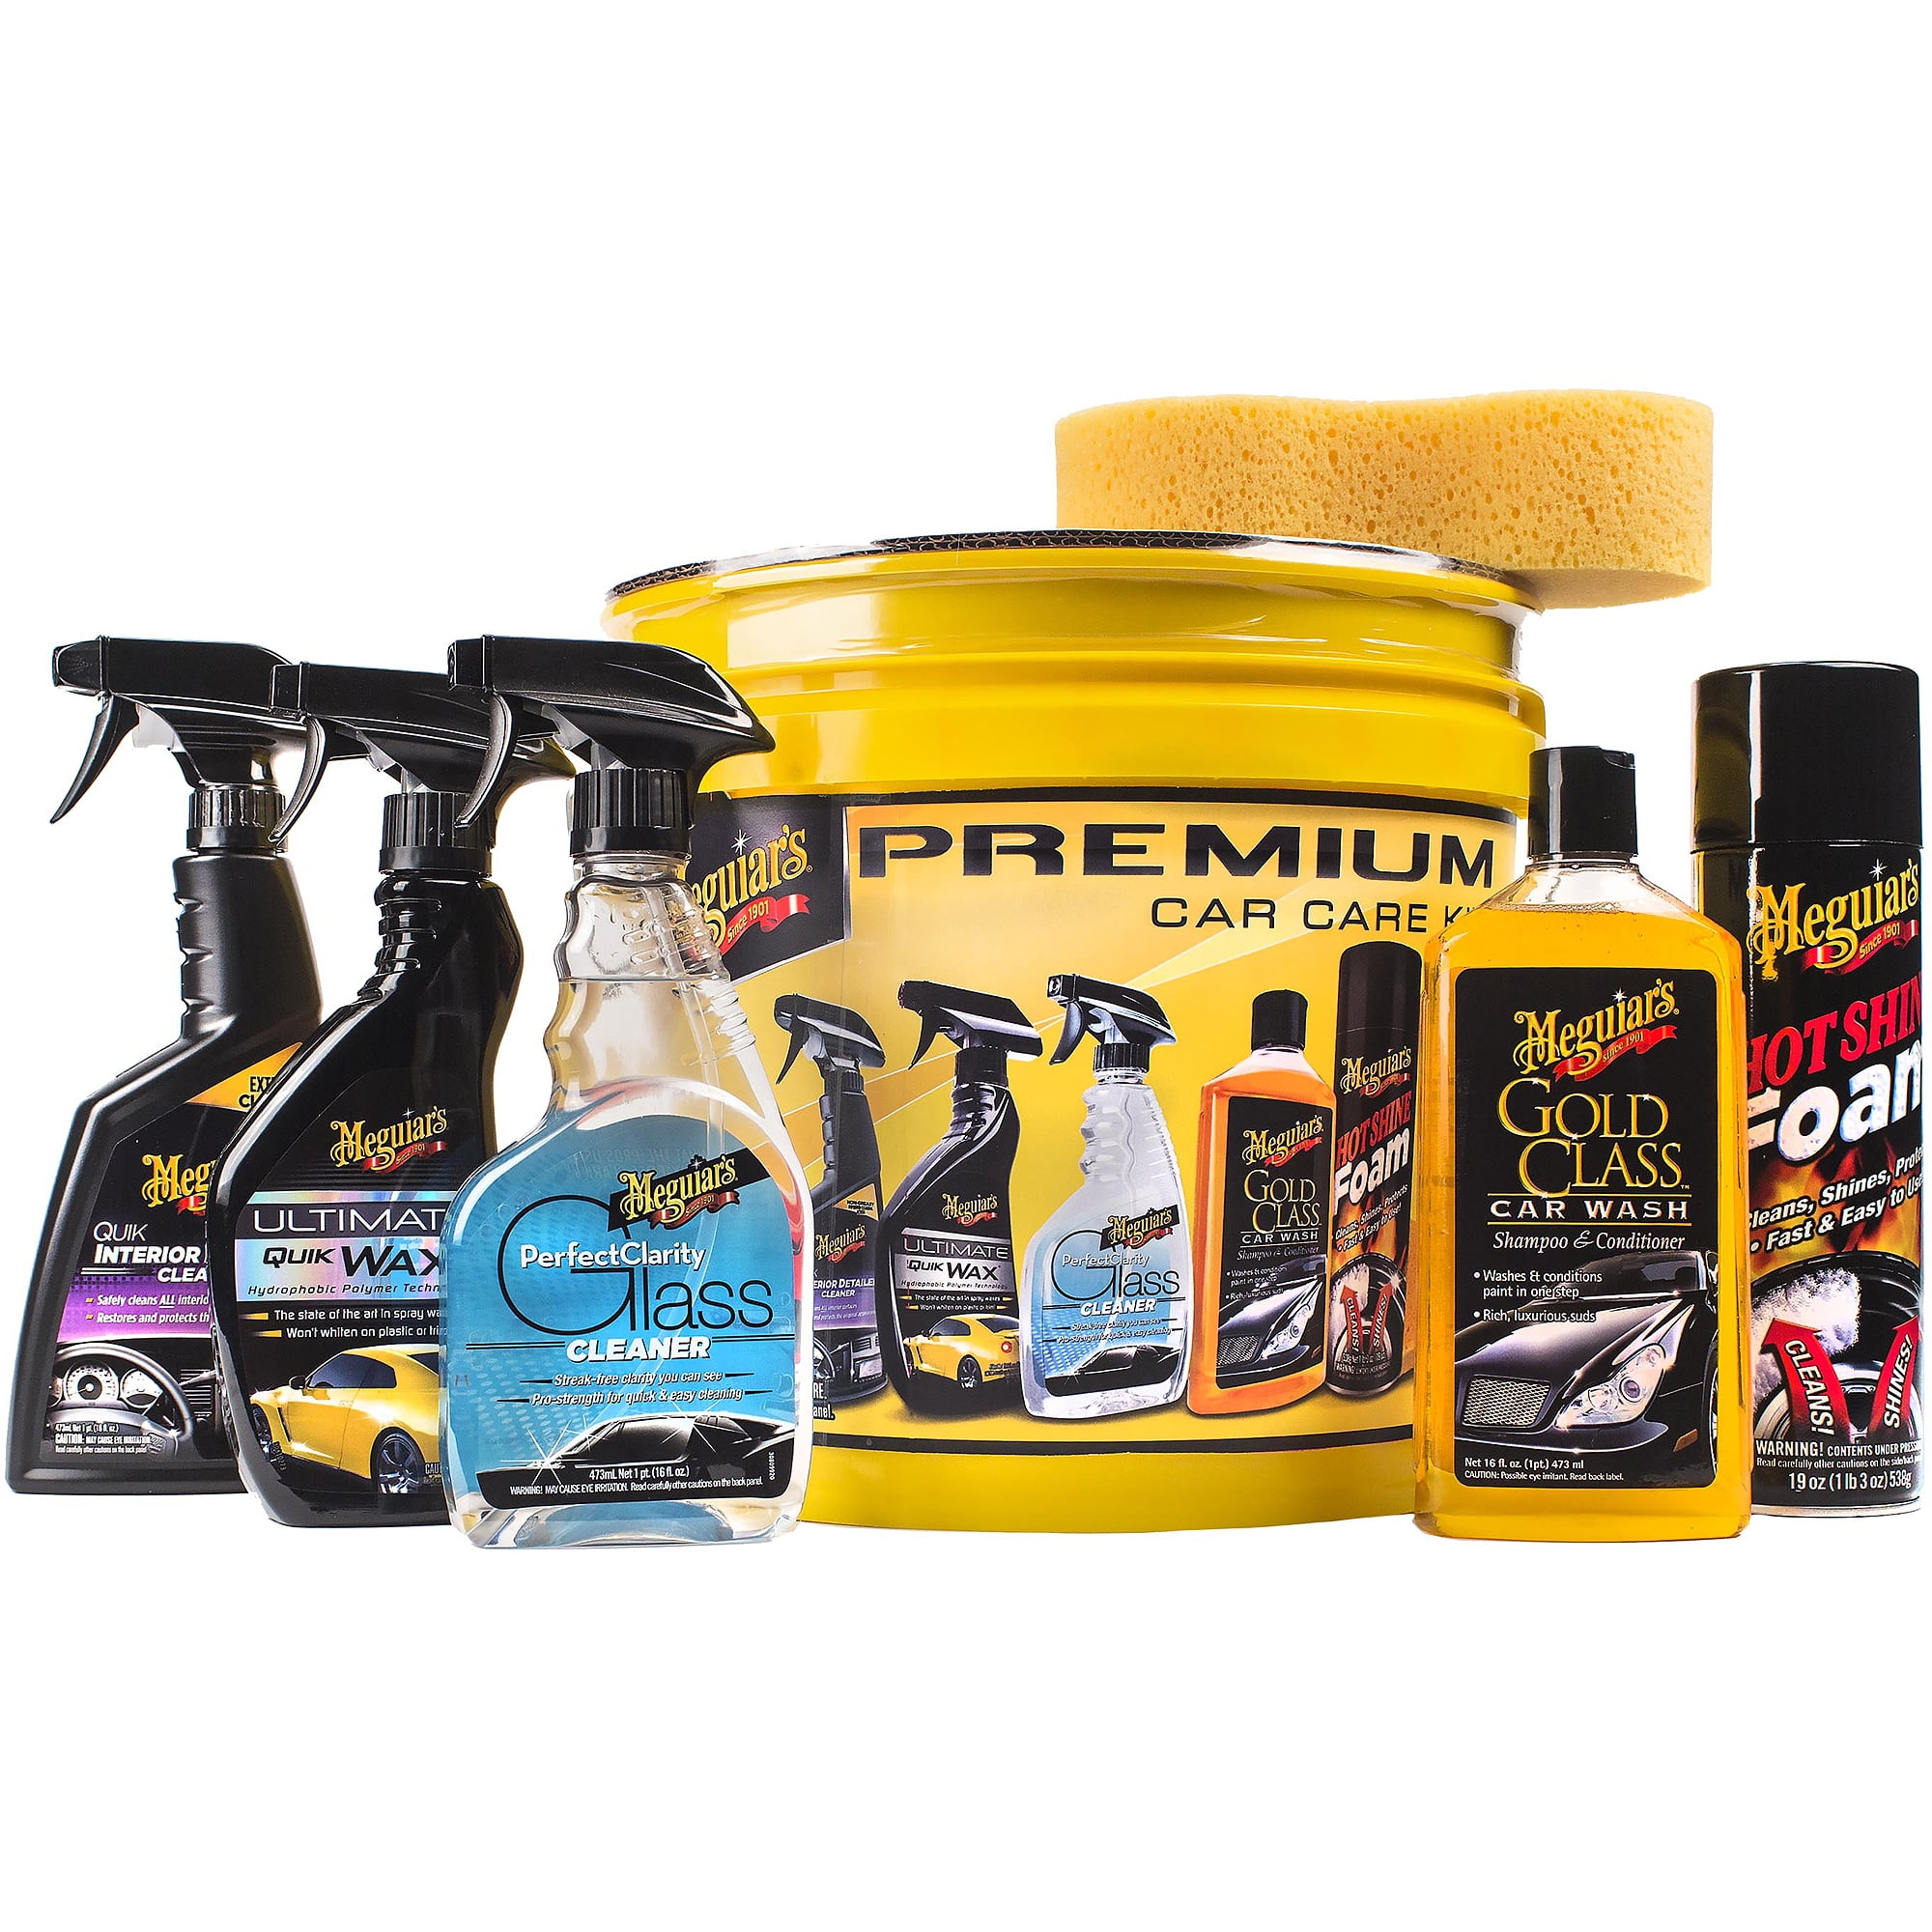 Kit Meguiar's Gold Class for car wash, with bucket and accessories